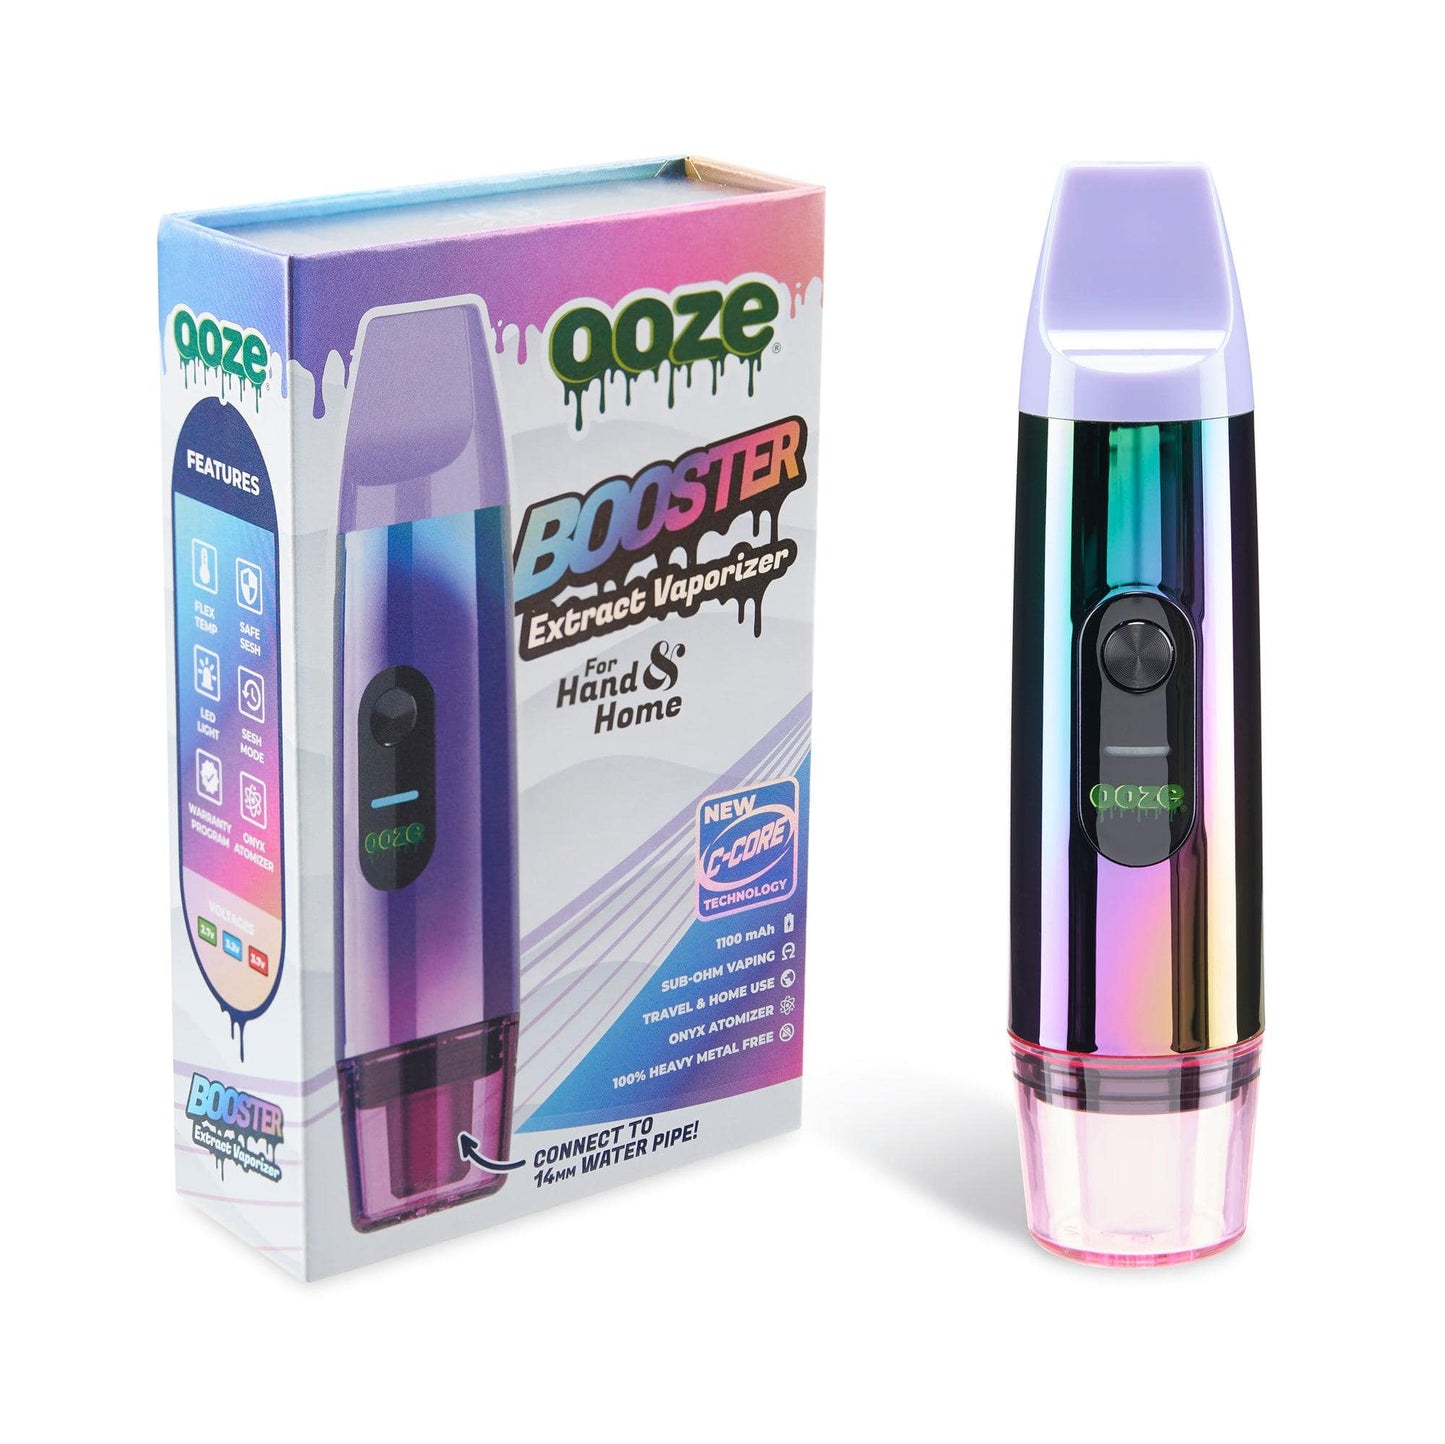 Ooze Batteries and Vapes Rainbow Ooze Booster Extract Vaporizer – C-Core 1100 mAh